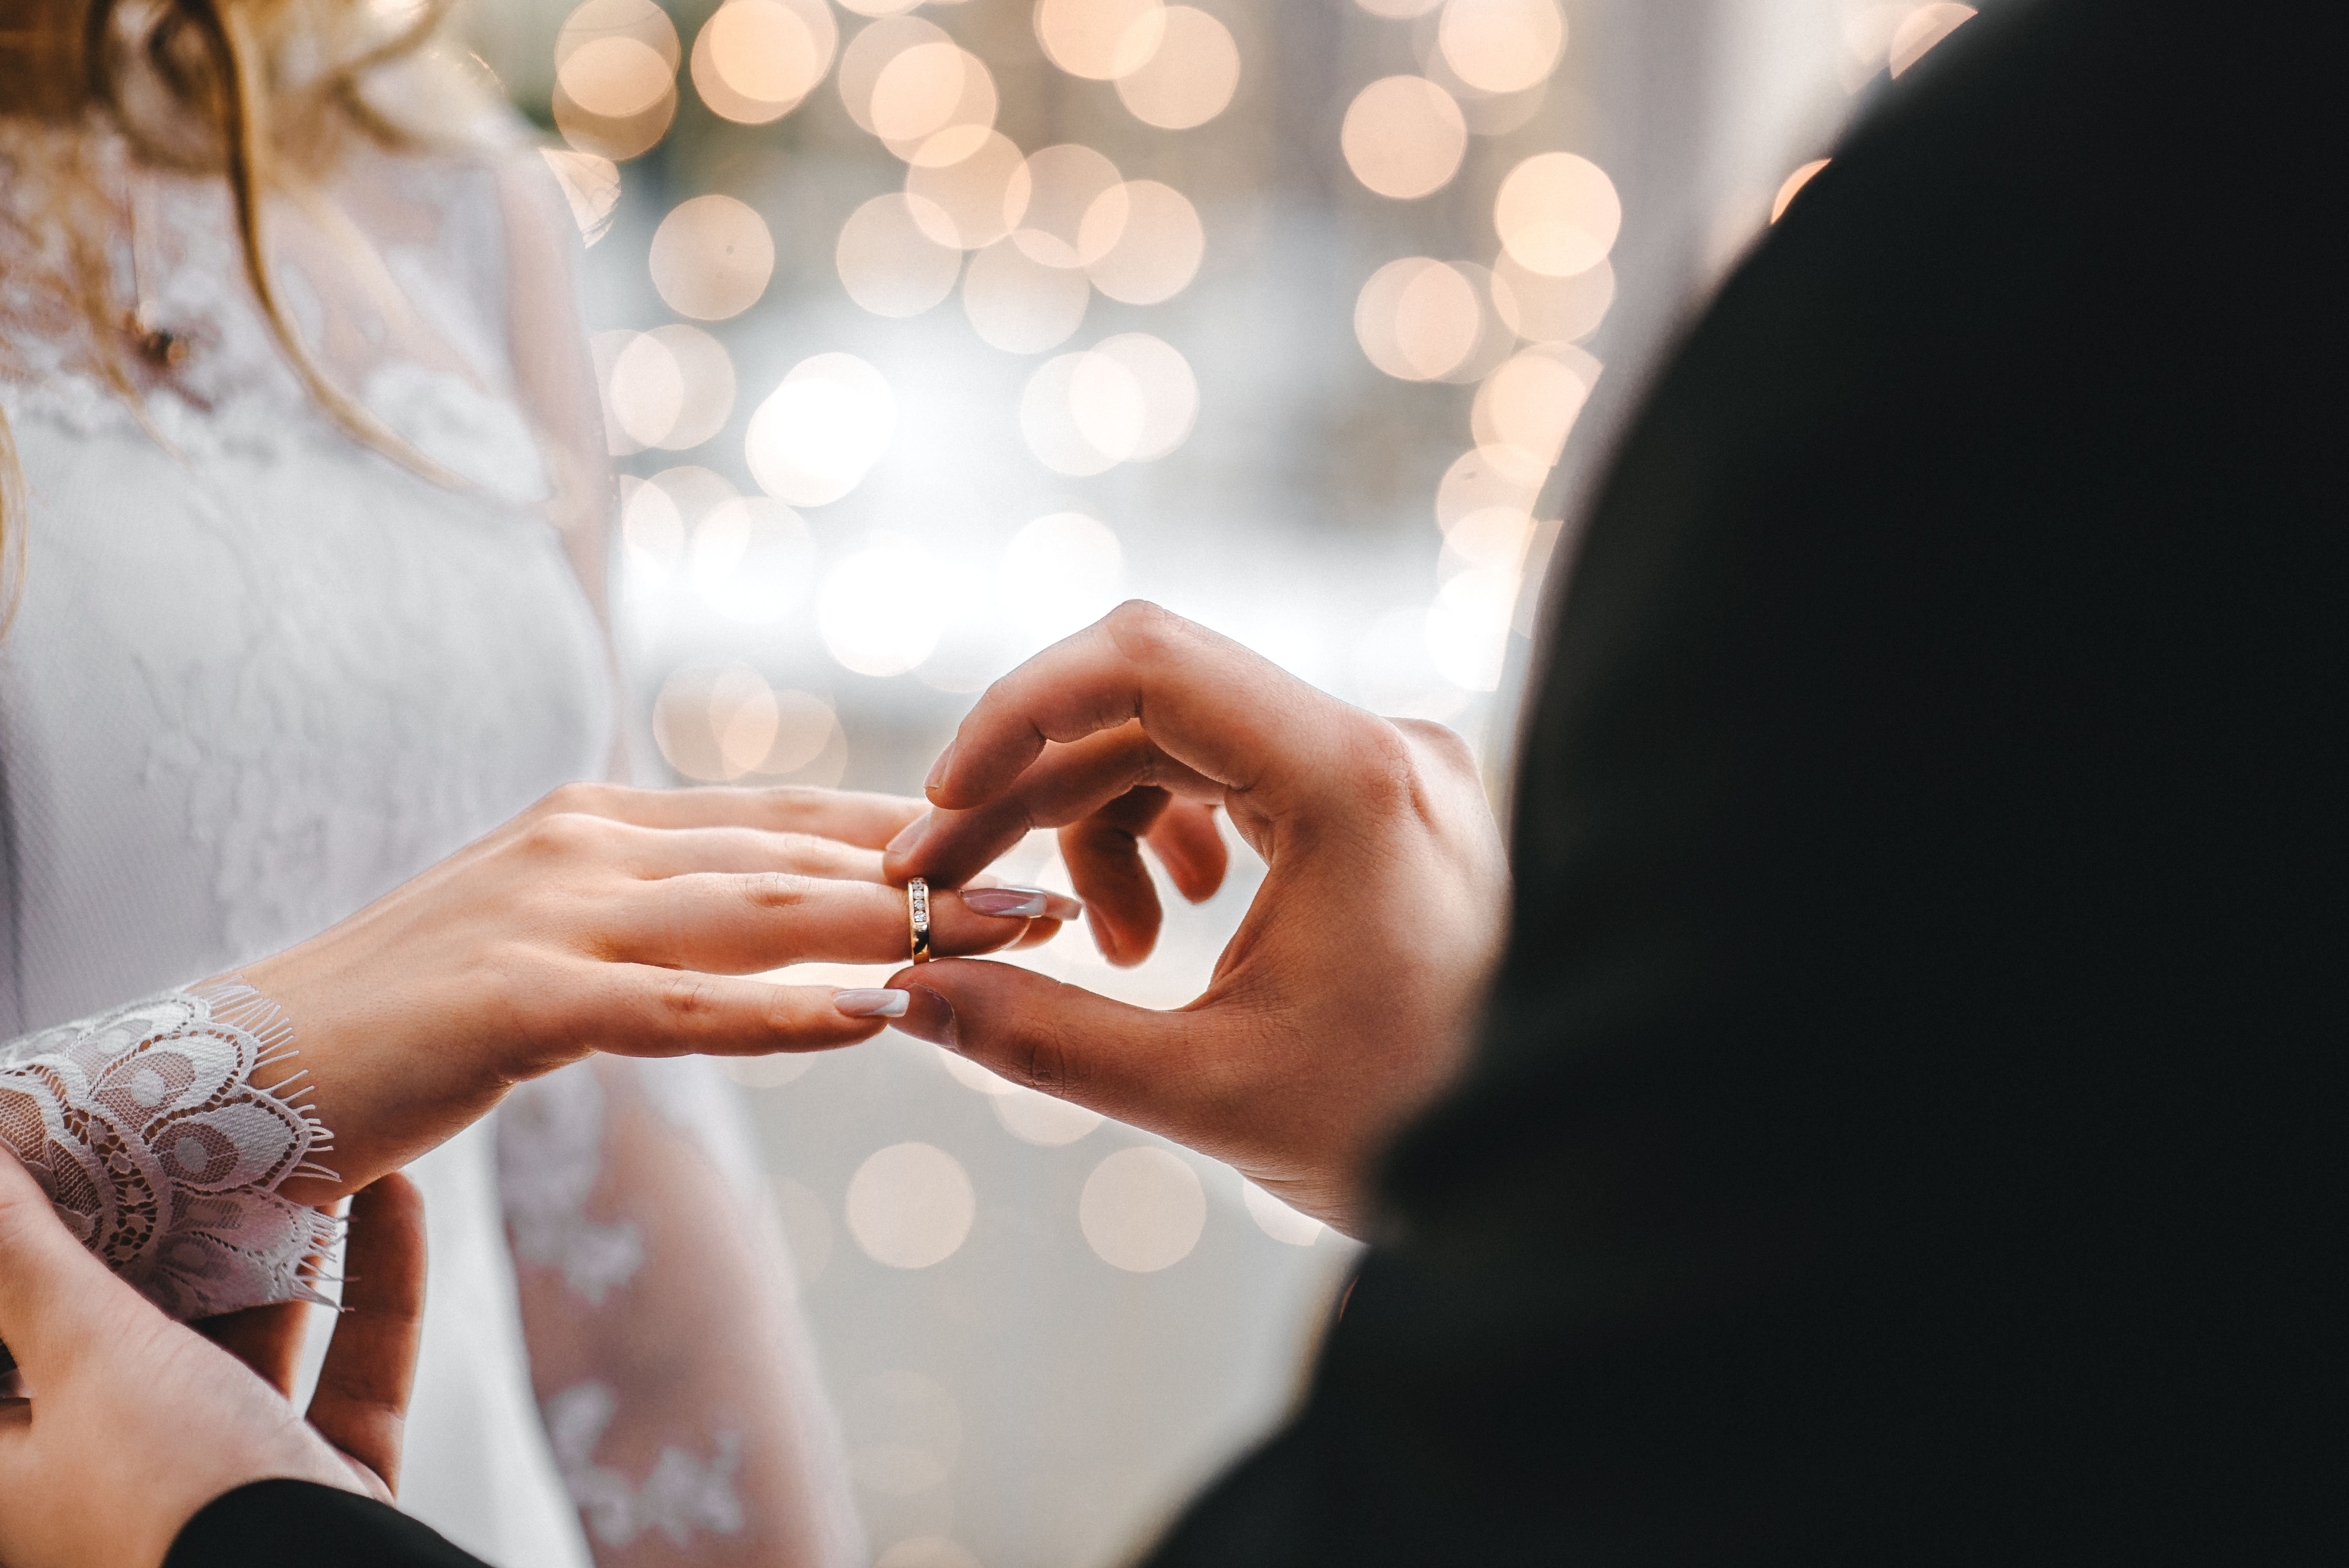 A groom putting the wedding ring on his bride at their wedding. | Source: Shutterstock